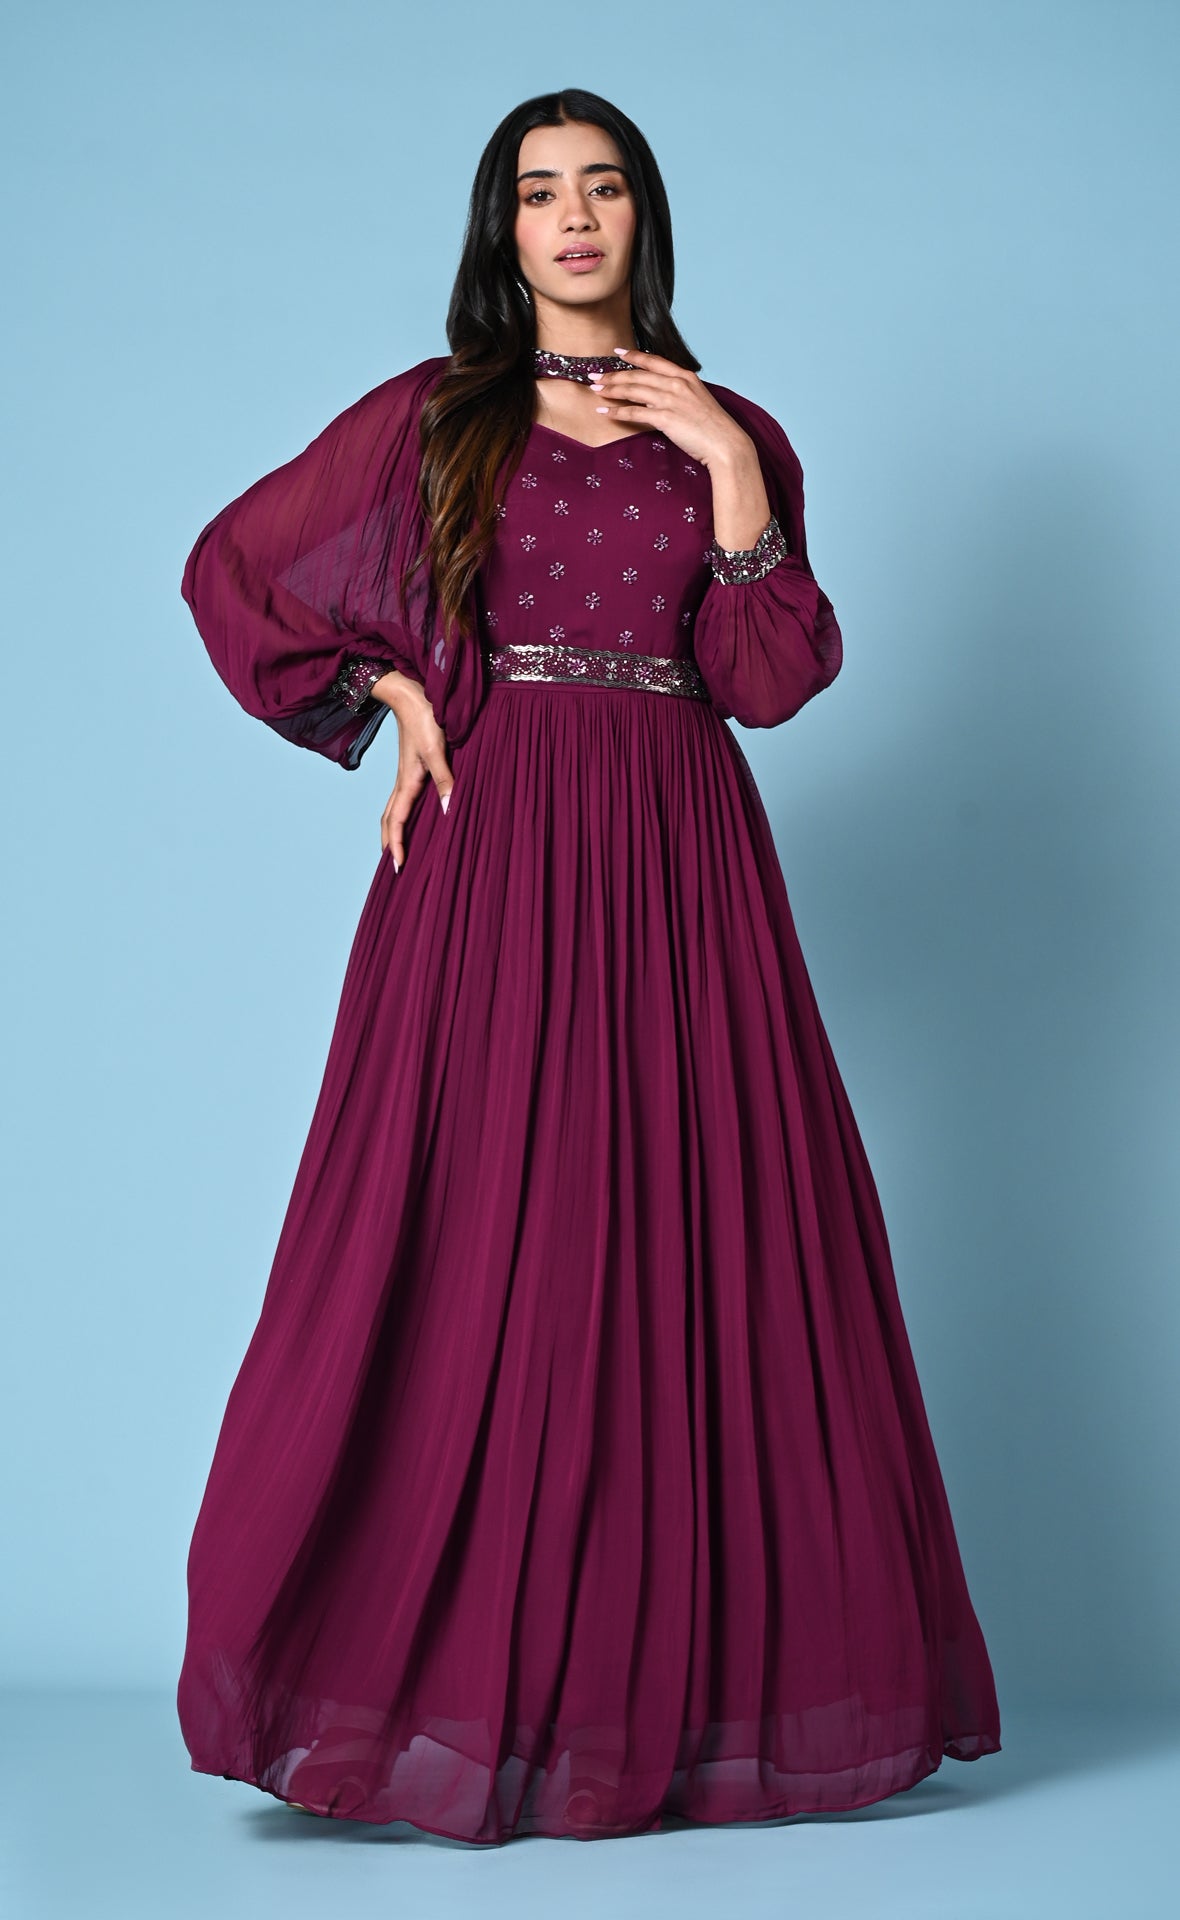 Wine cocktail gown with statement sleeve and hip belt